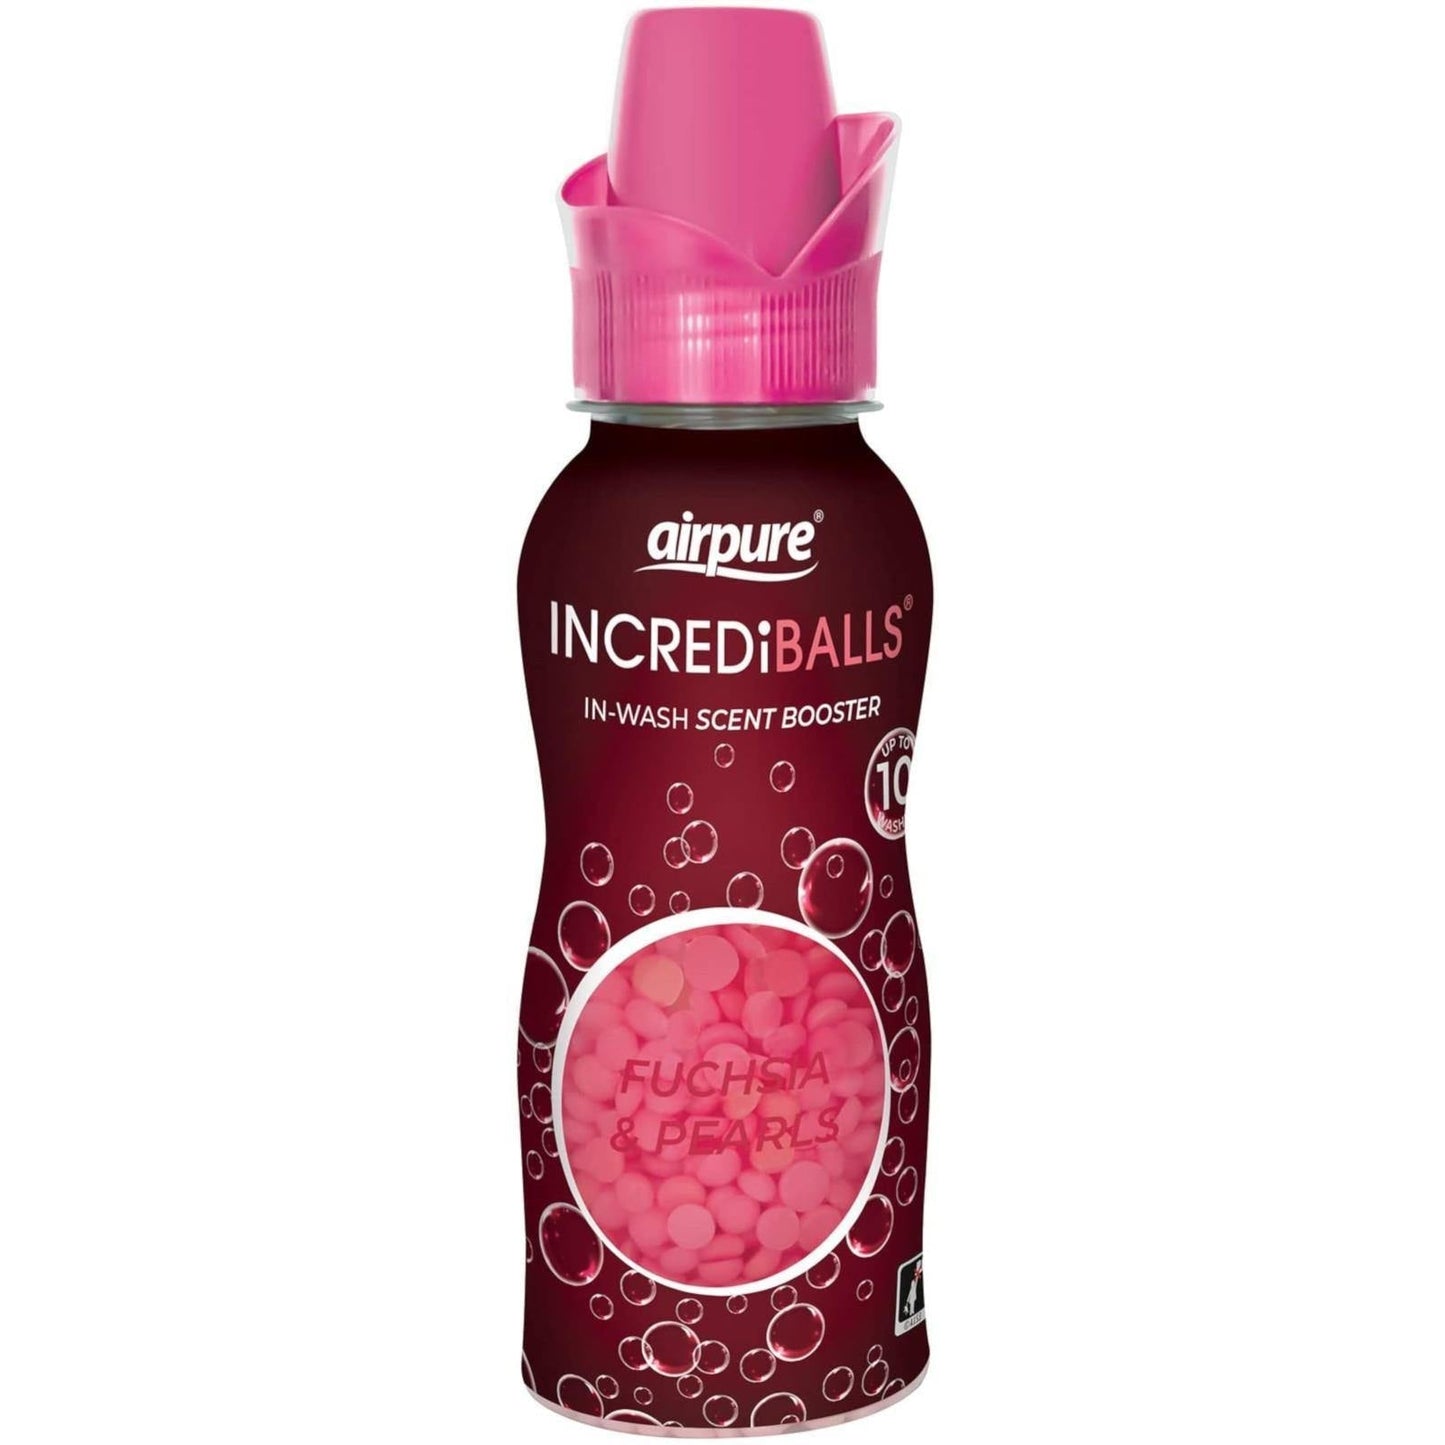 Airpure Incrediballs In-Wash Scent Booster Fuschia & Pearl 10 Washes